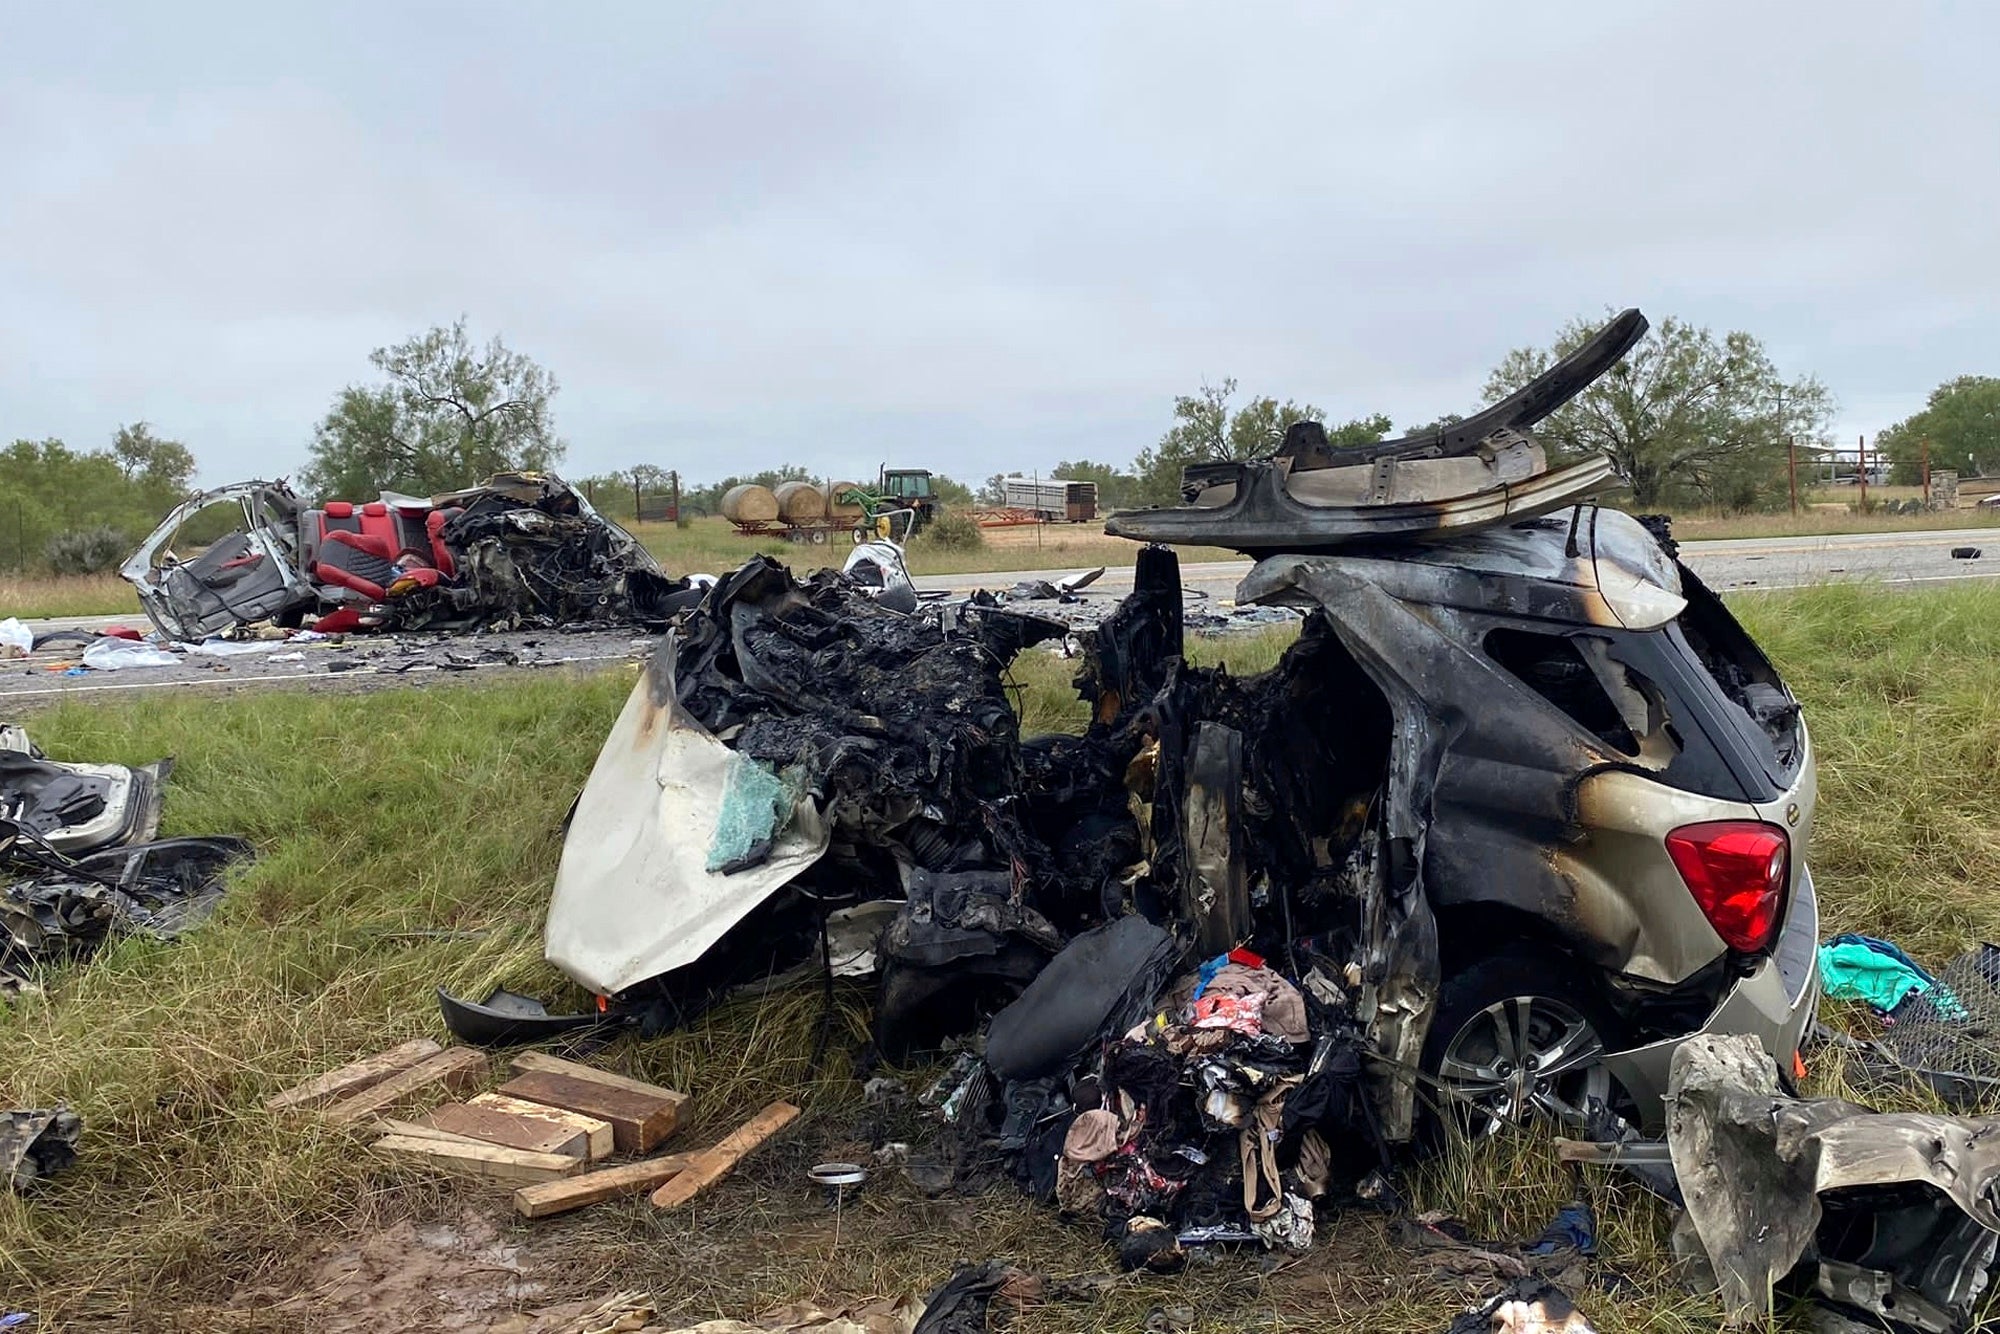 Two cars collided on the South Texas highway